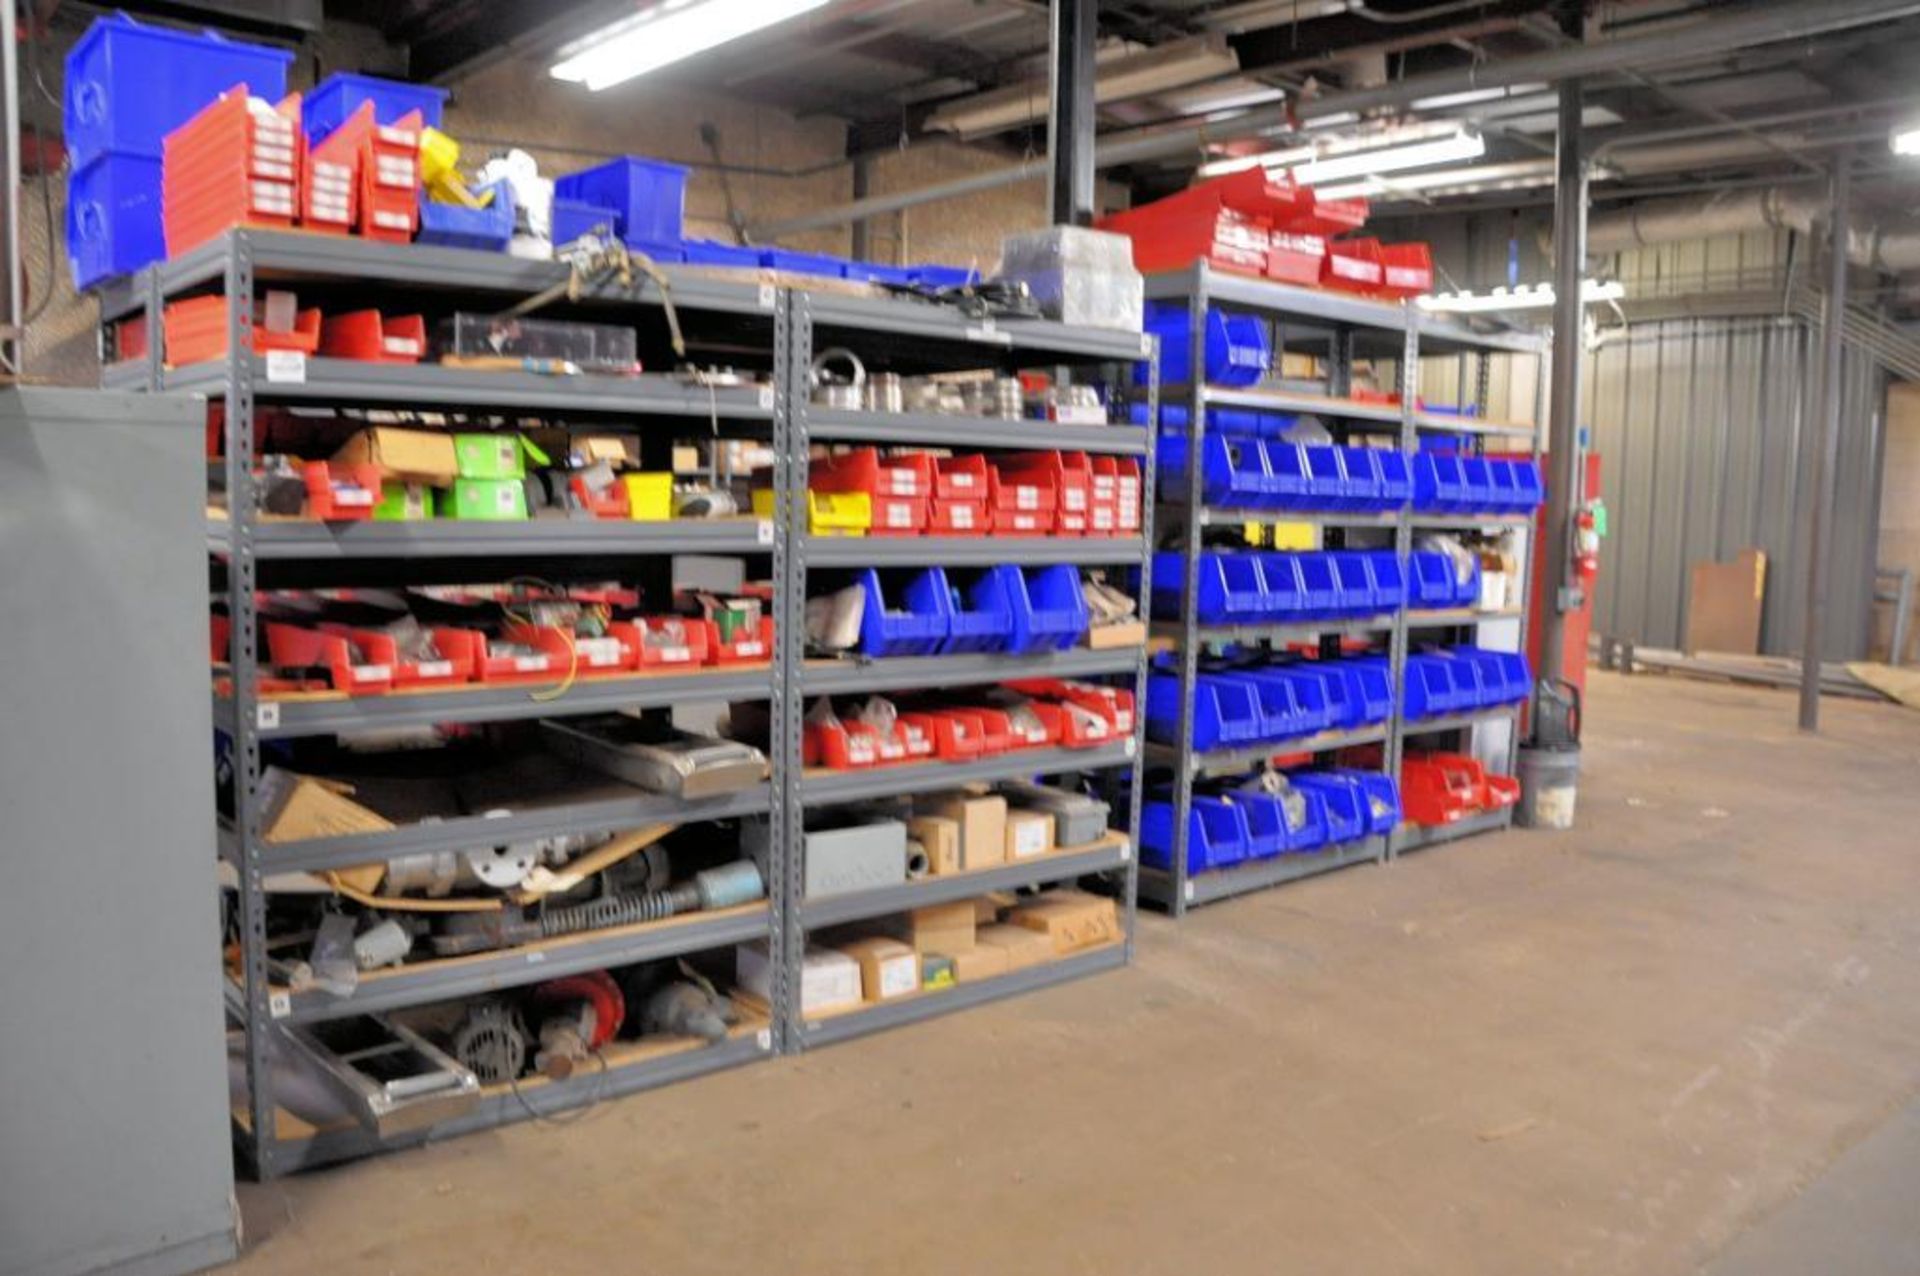 Lot - (8) Sections of Shelving with Diaphragm Pumps, Valves, Electronic Machine Parts, Pipe Fittings